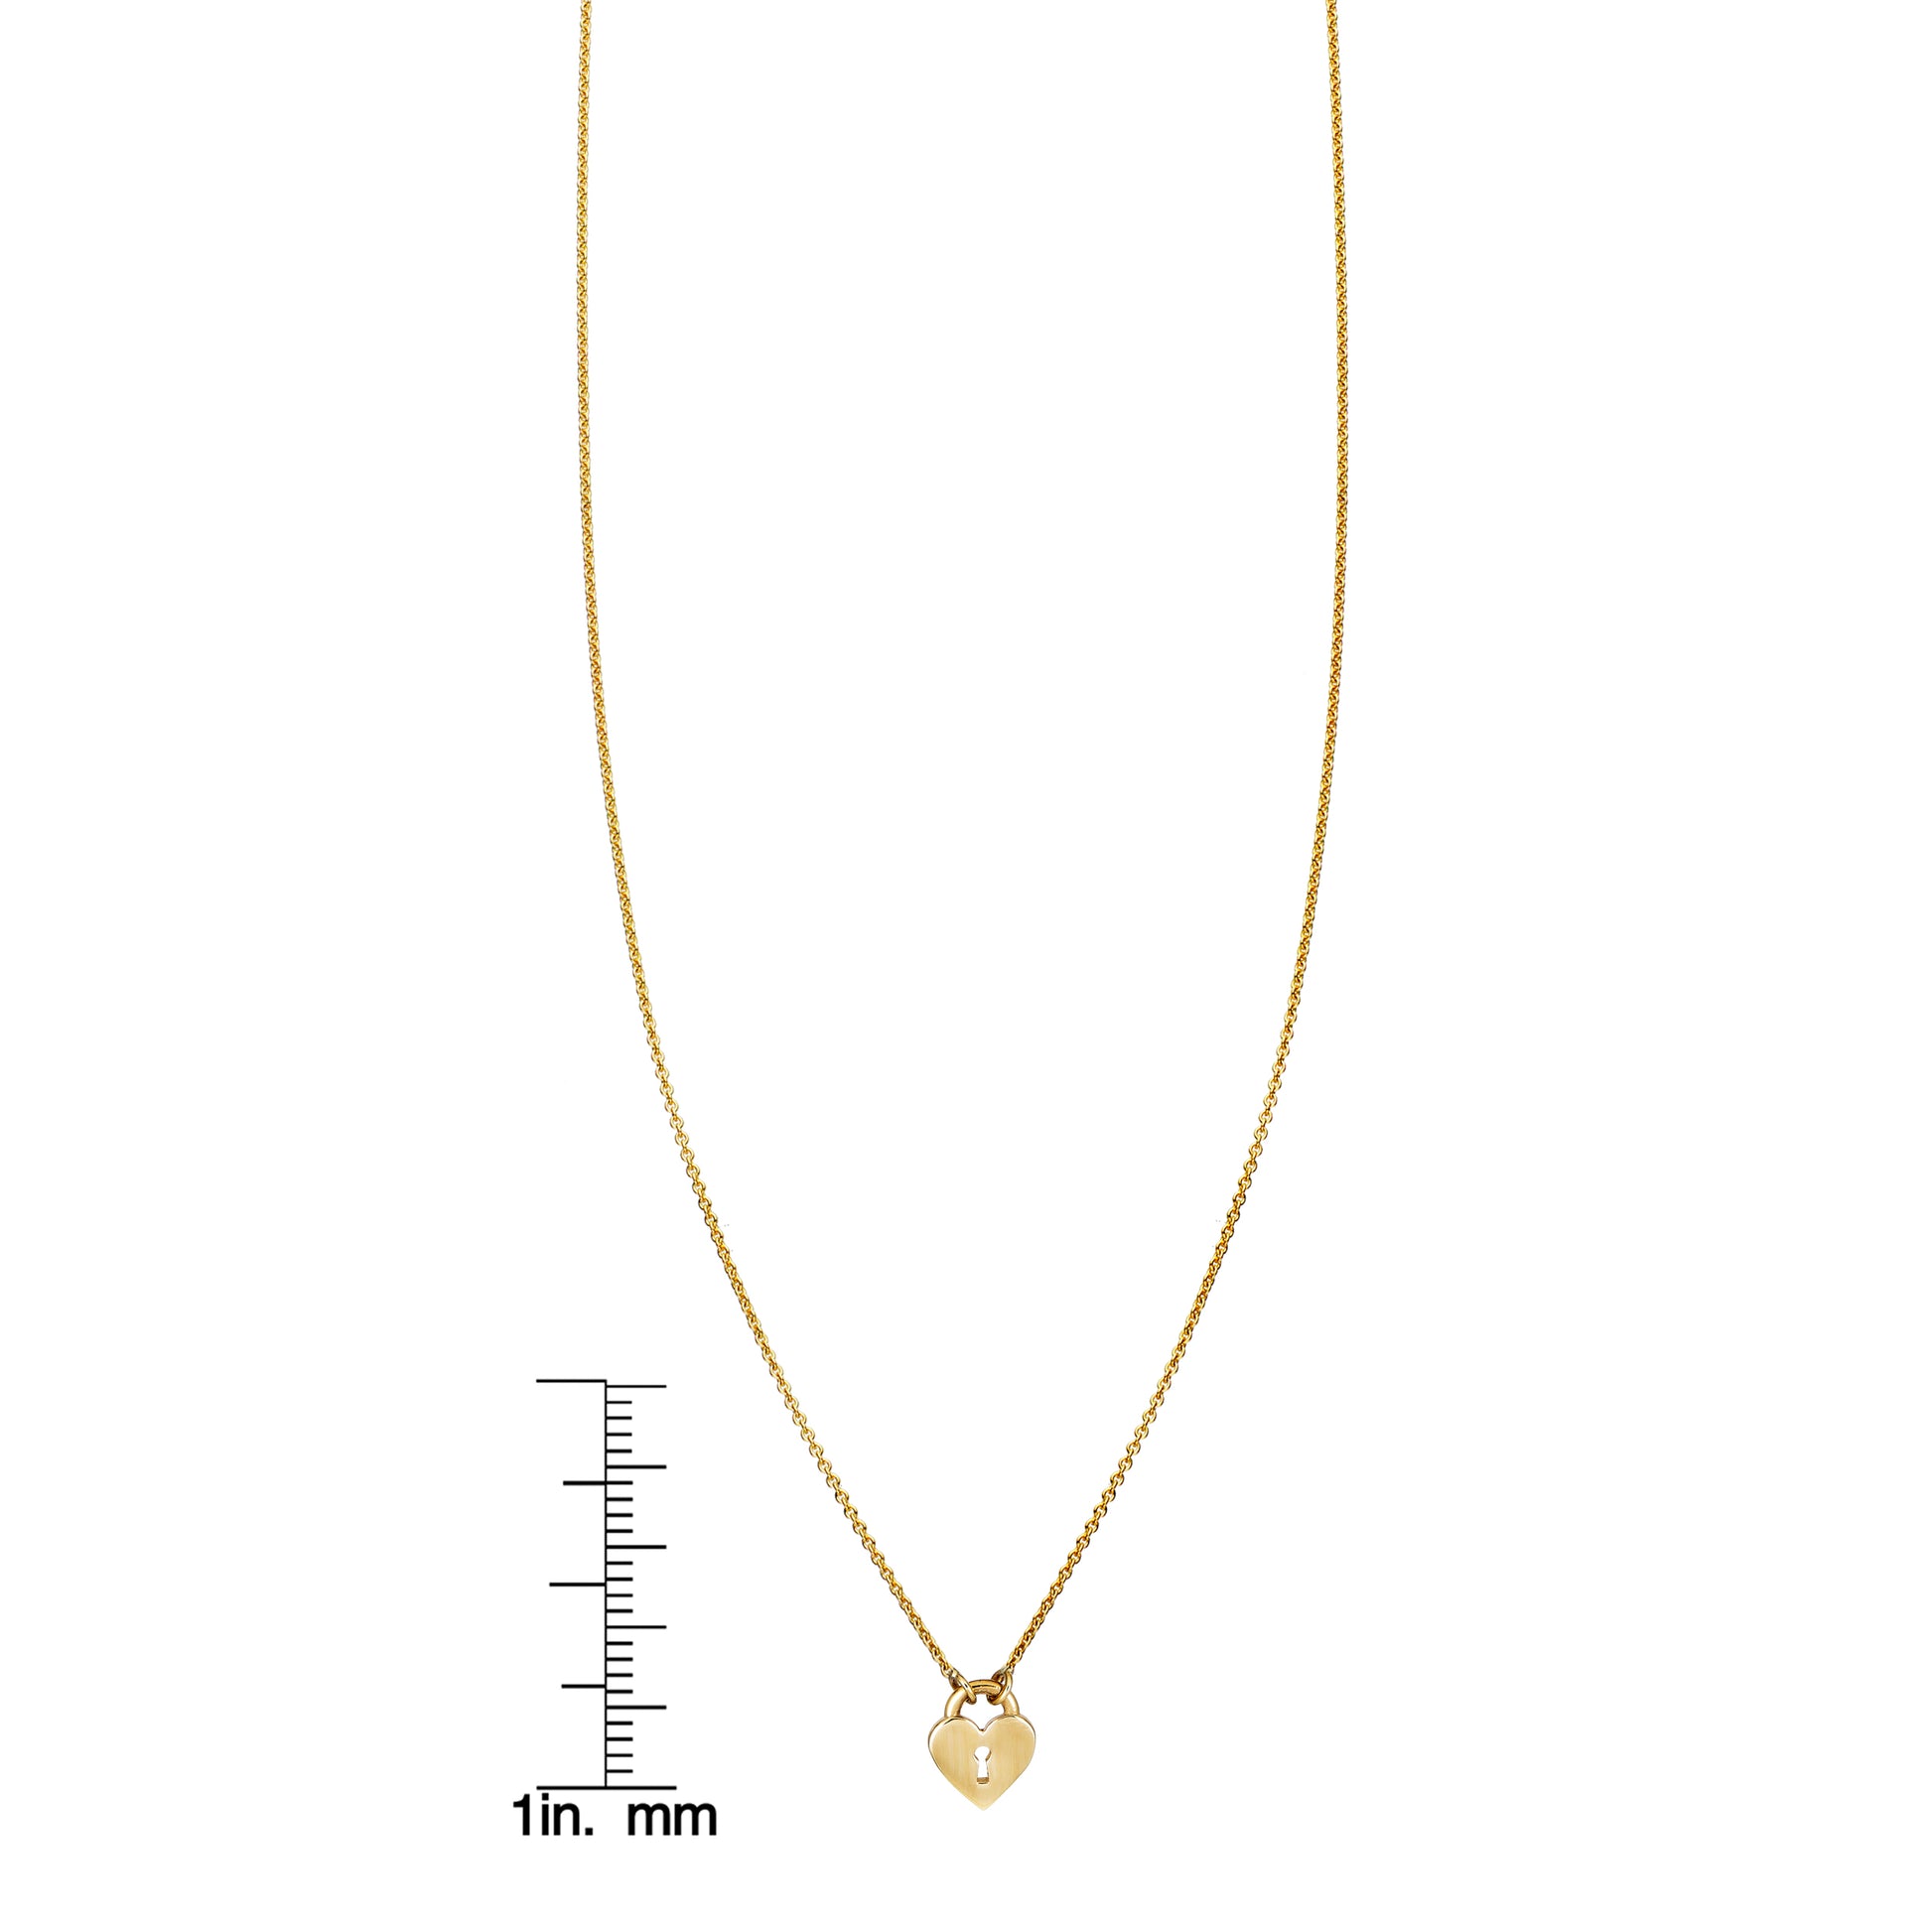 petite gold heart lock necklace with ruler_6d2e0491 242b 4071 9723 c8a030b919f6